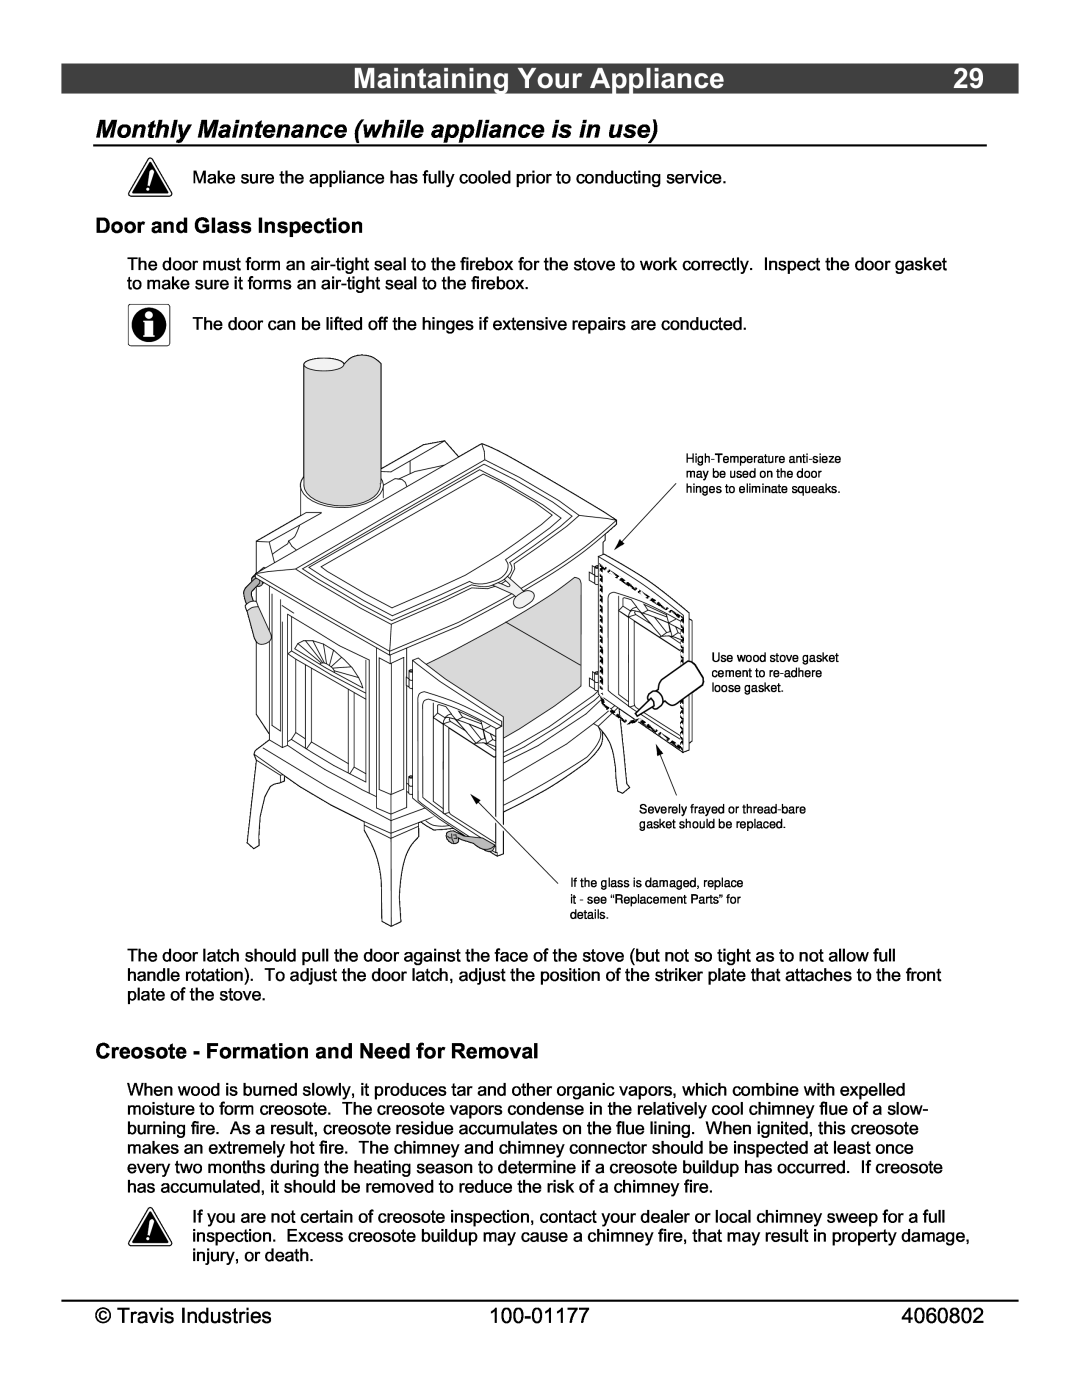 Lopi Leyden Wood Stove owner manual Maintaining Your Appliance, Monthly Maintenance while appliance is in use 